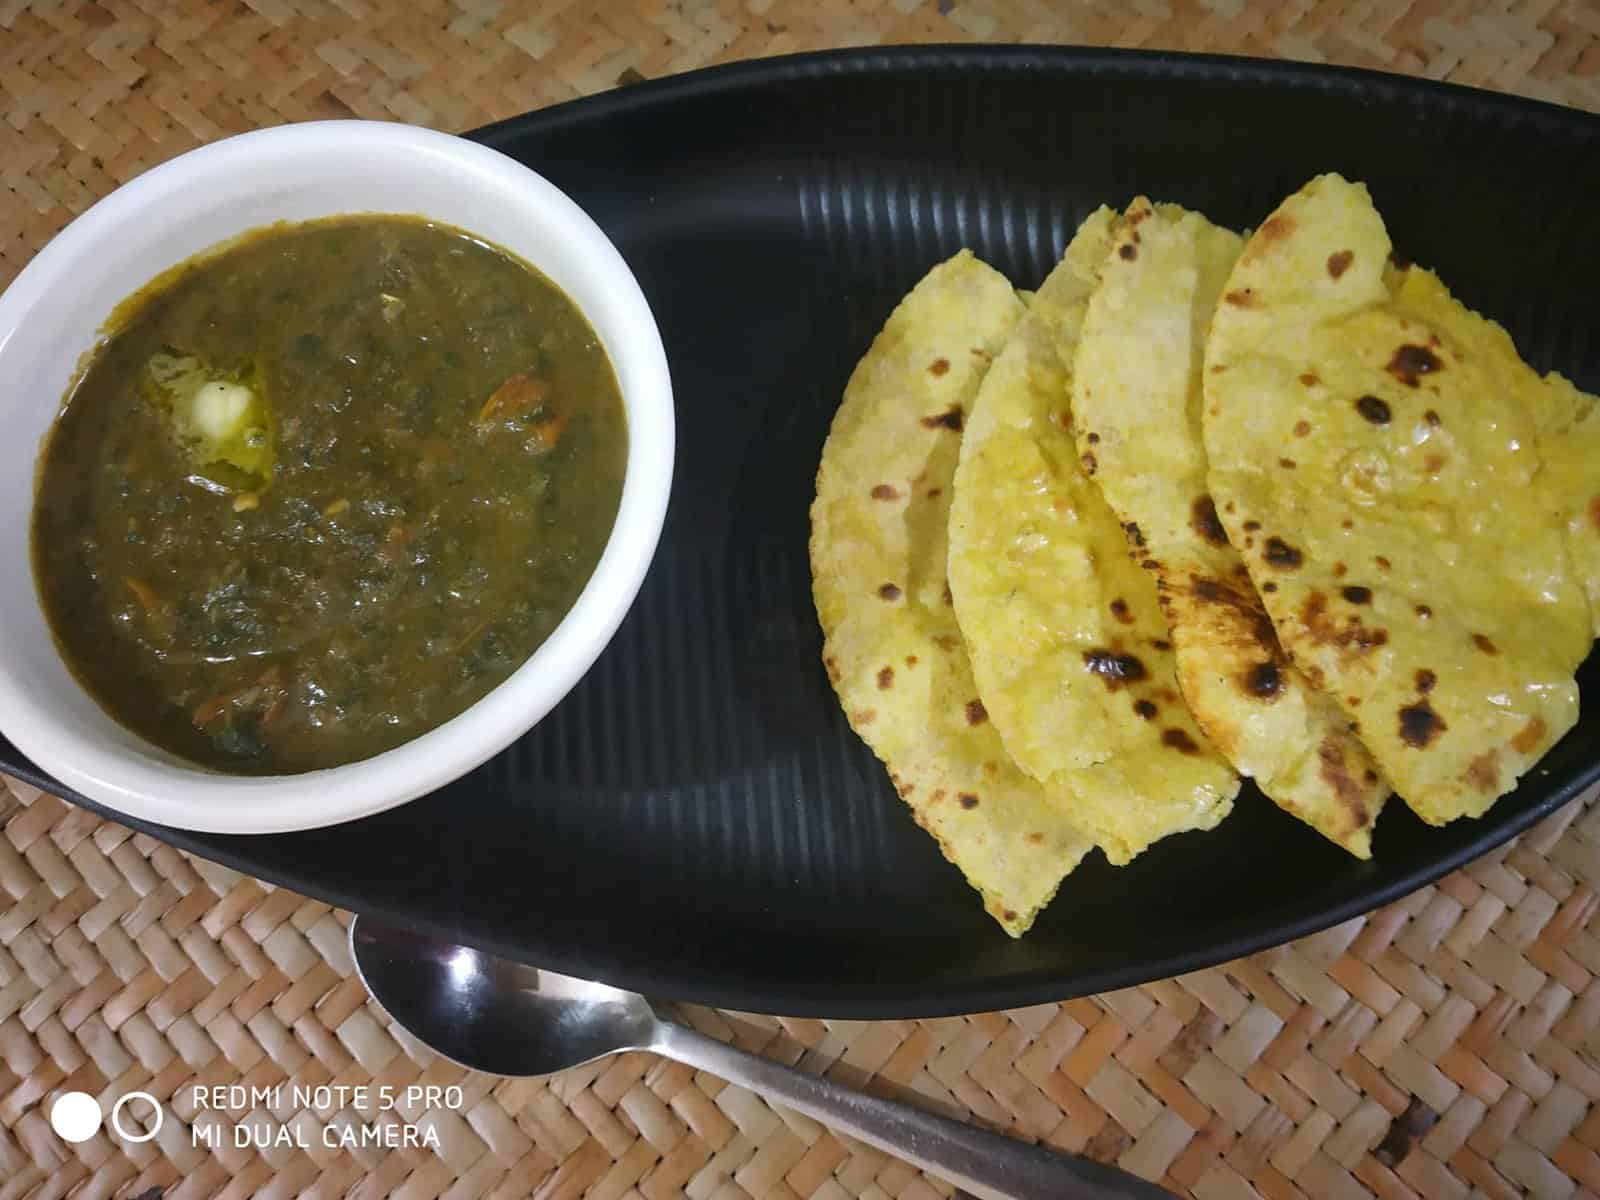 Mixed saag - Plattershare - Recipes, food stories and food lovers